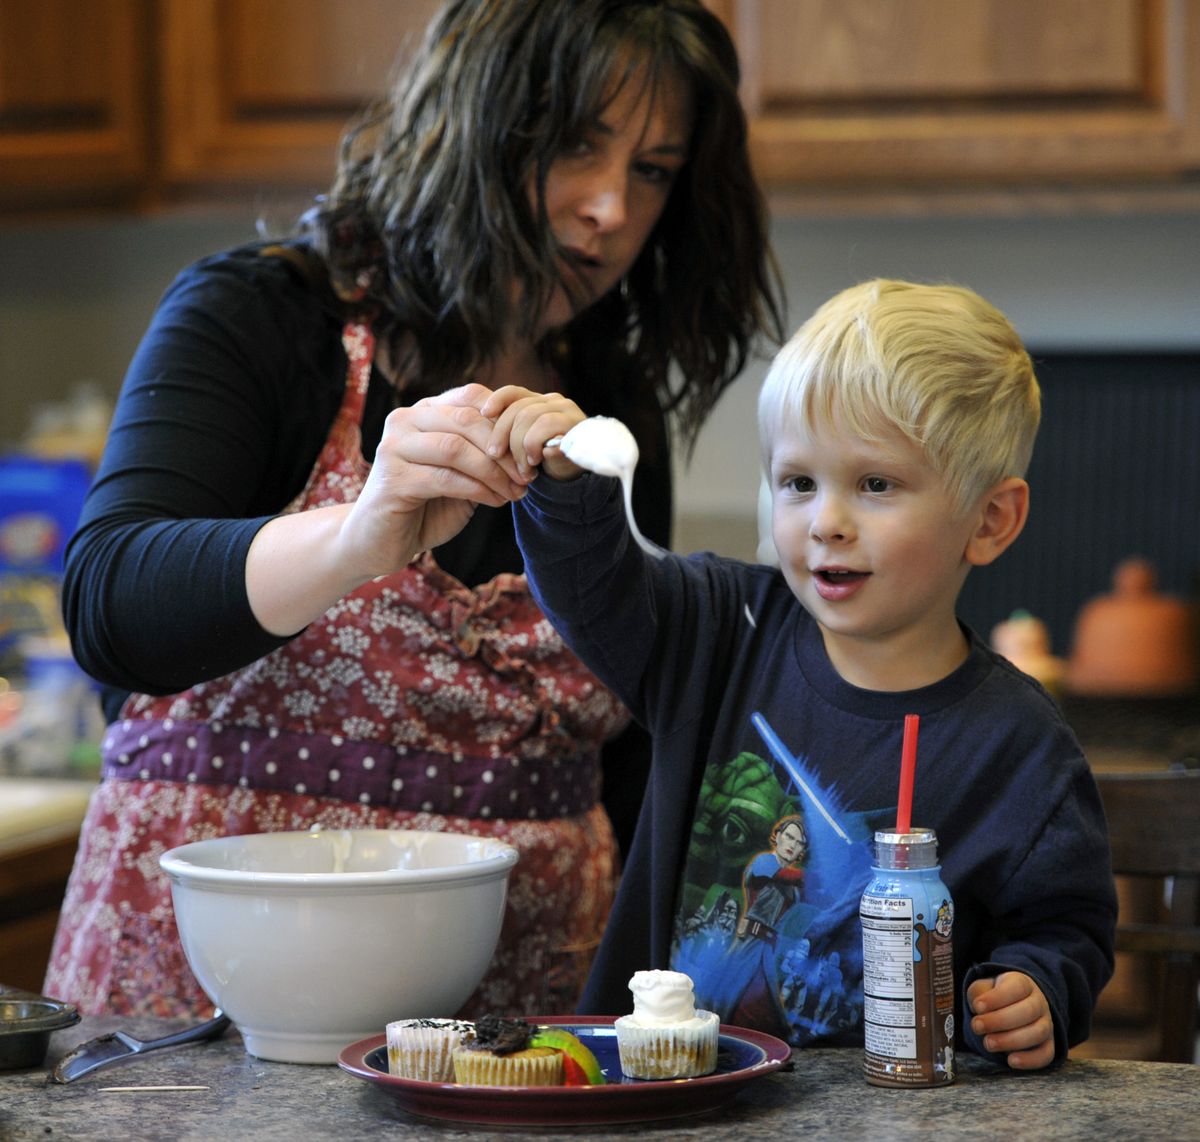 Julie Grant and her son, Carson, 4, drip melted almond bark onto treats to create healthier Halloween fun snacks in their Eagle Ridge home. (Dan Pelle / The Spokesman-Review)